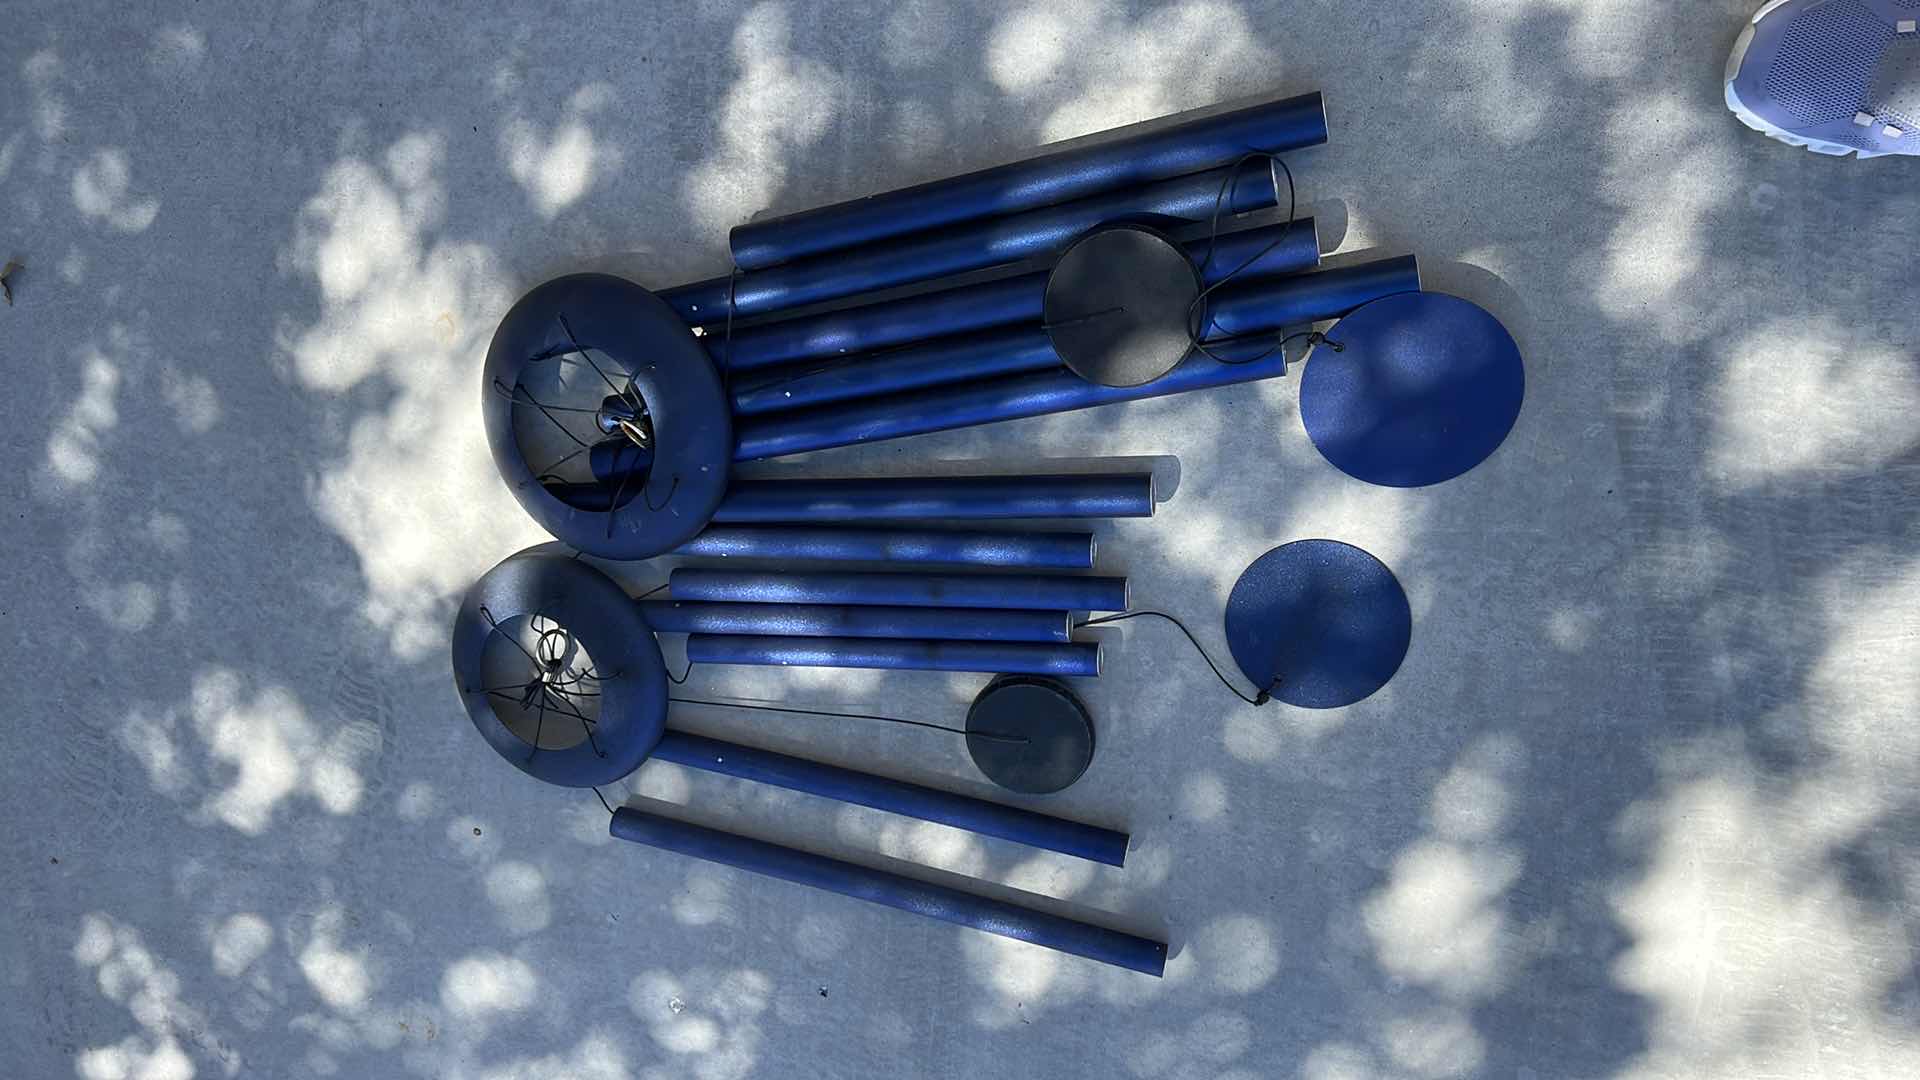 Photo 2 of 2-BLUE METAL HANGING WIND CHIMES